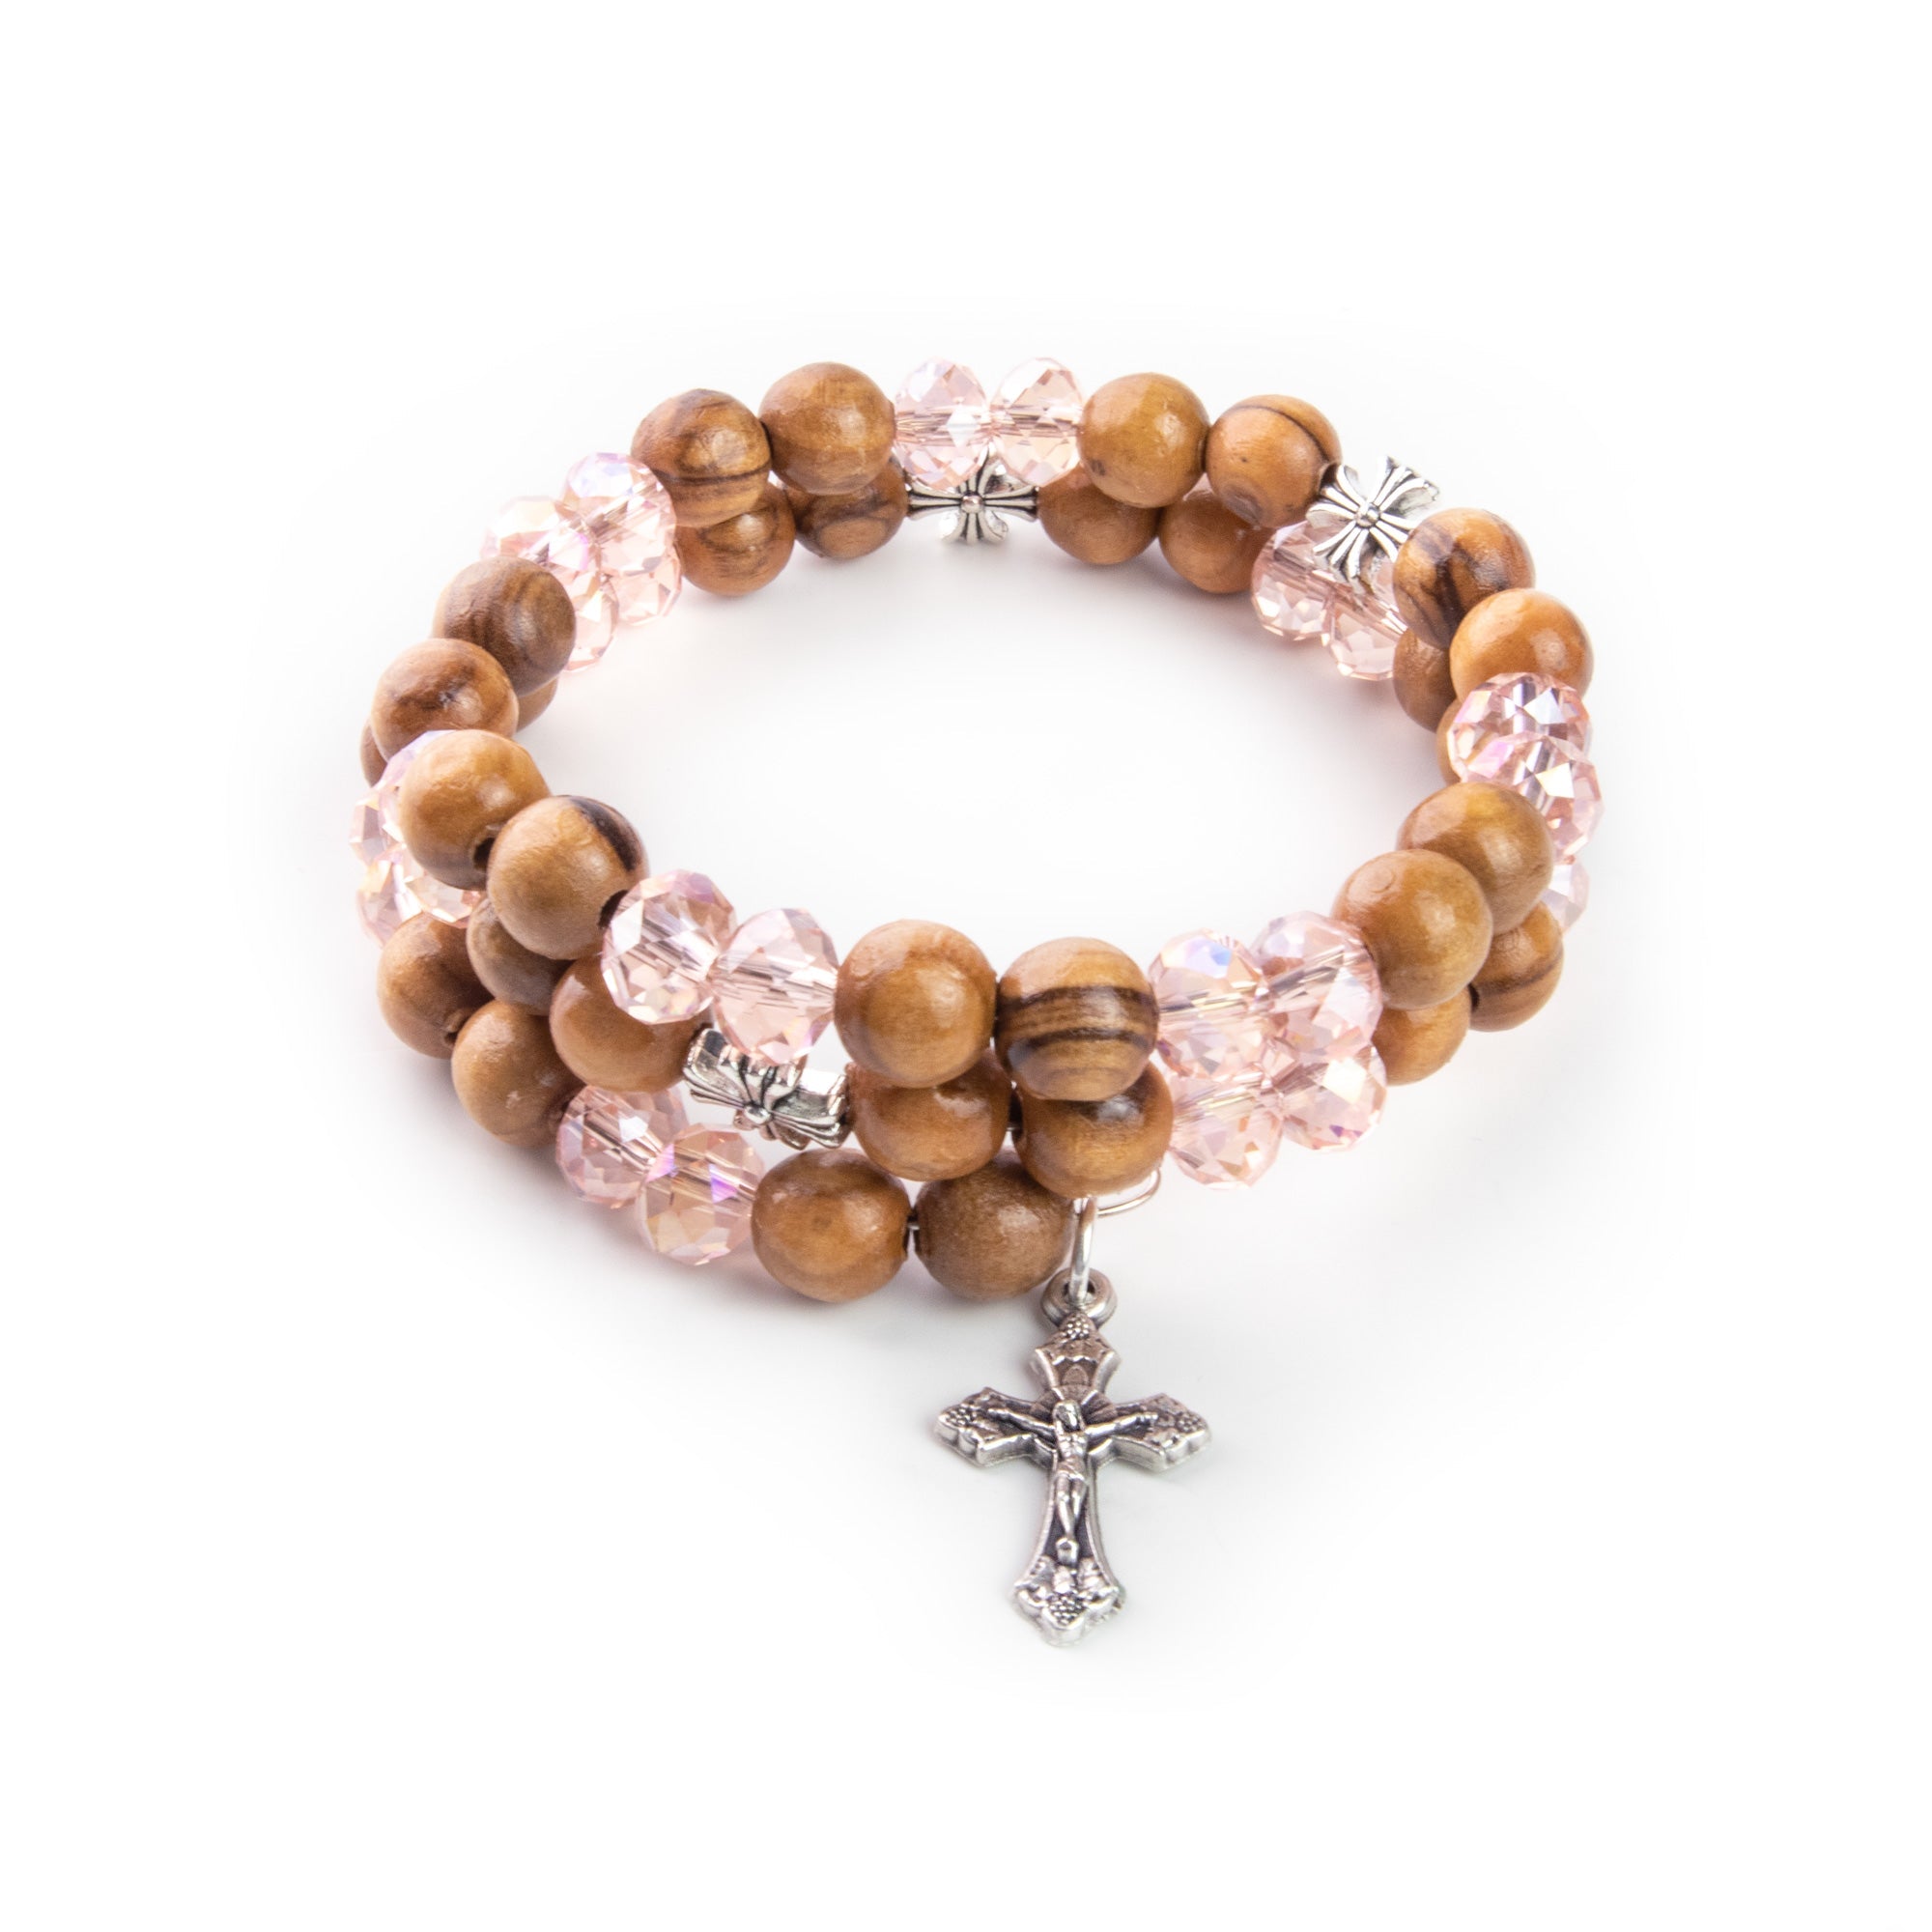 Helix Stretch Wrap Bracelet with Olive Wood and Pink Beads, Inline Cross and Crucifix Dangle in Velvet Box